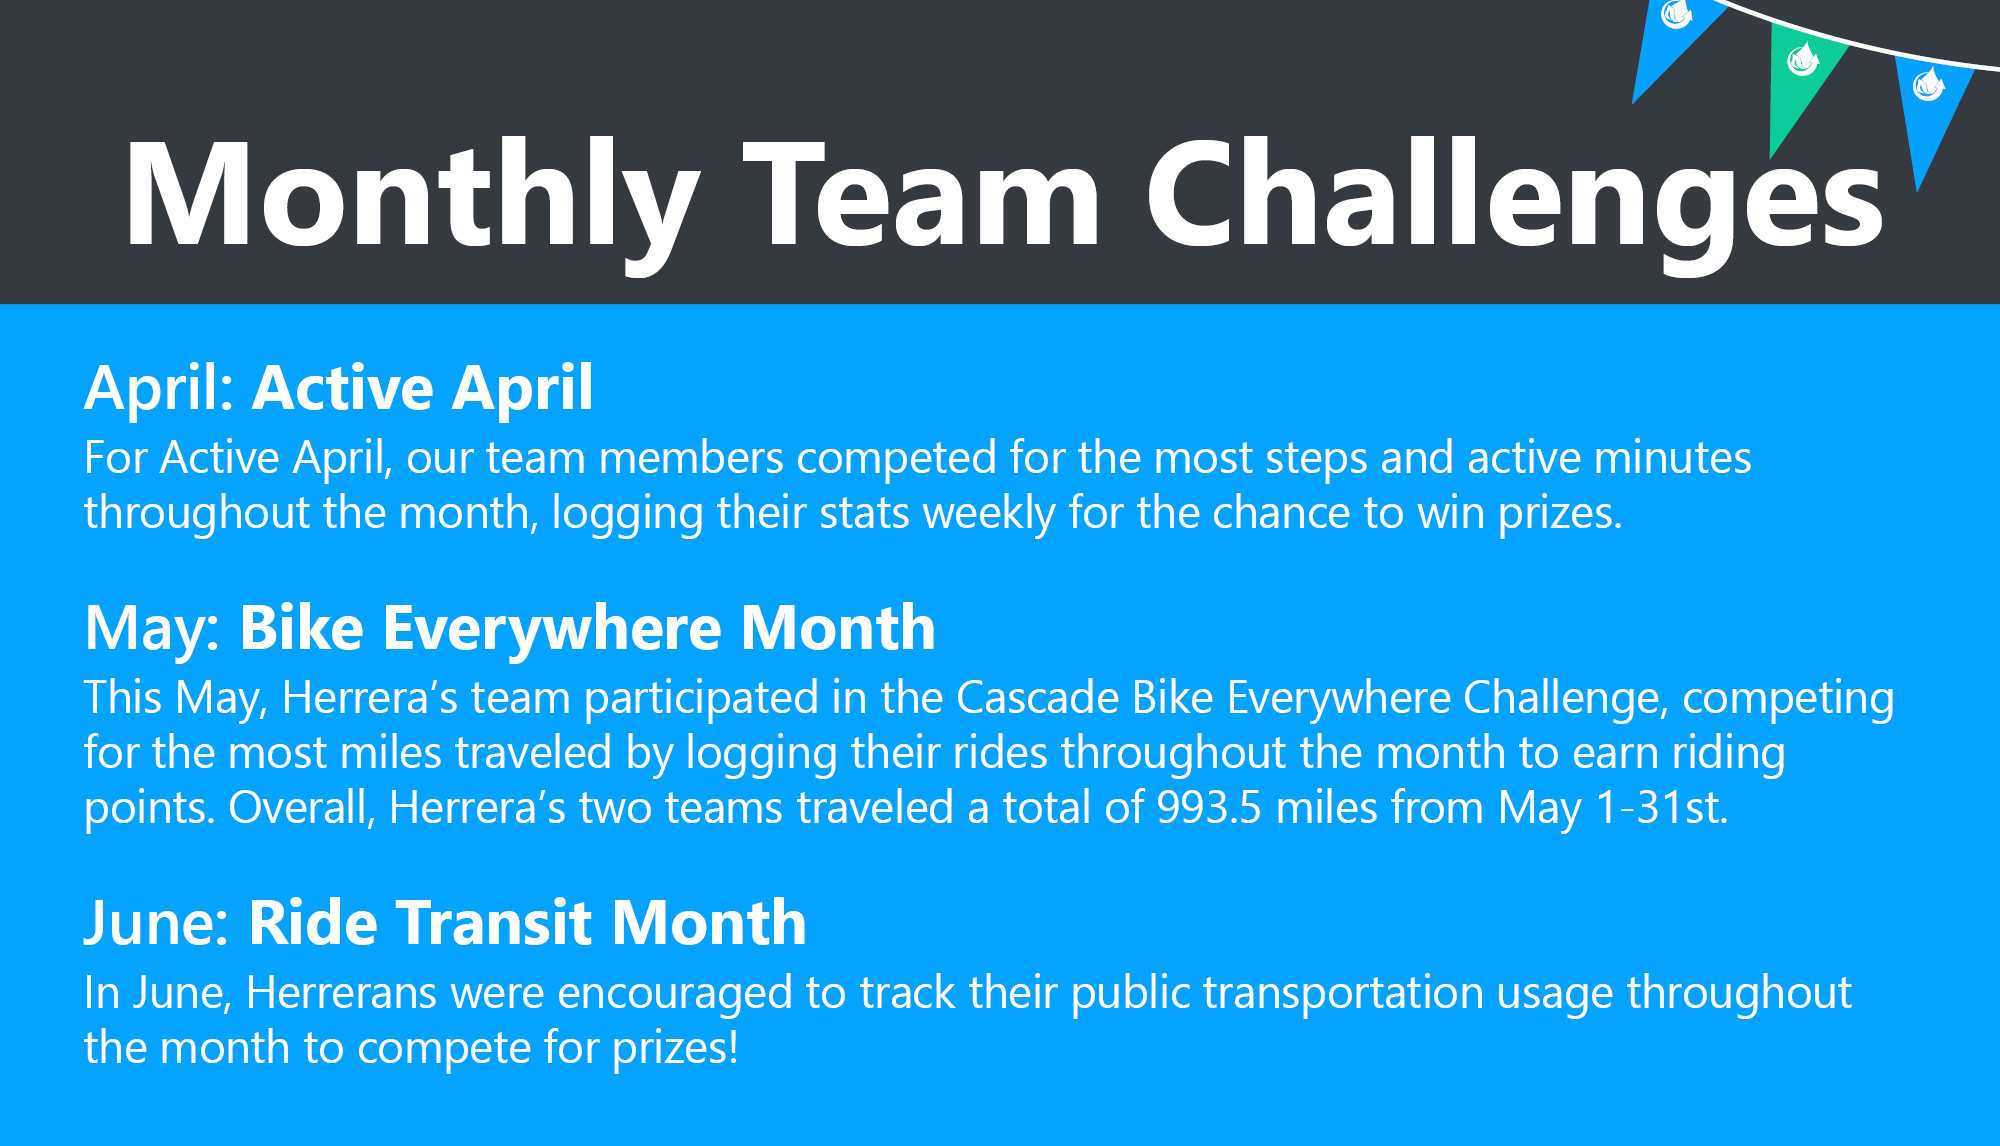 Q2-monthly-team-challenges